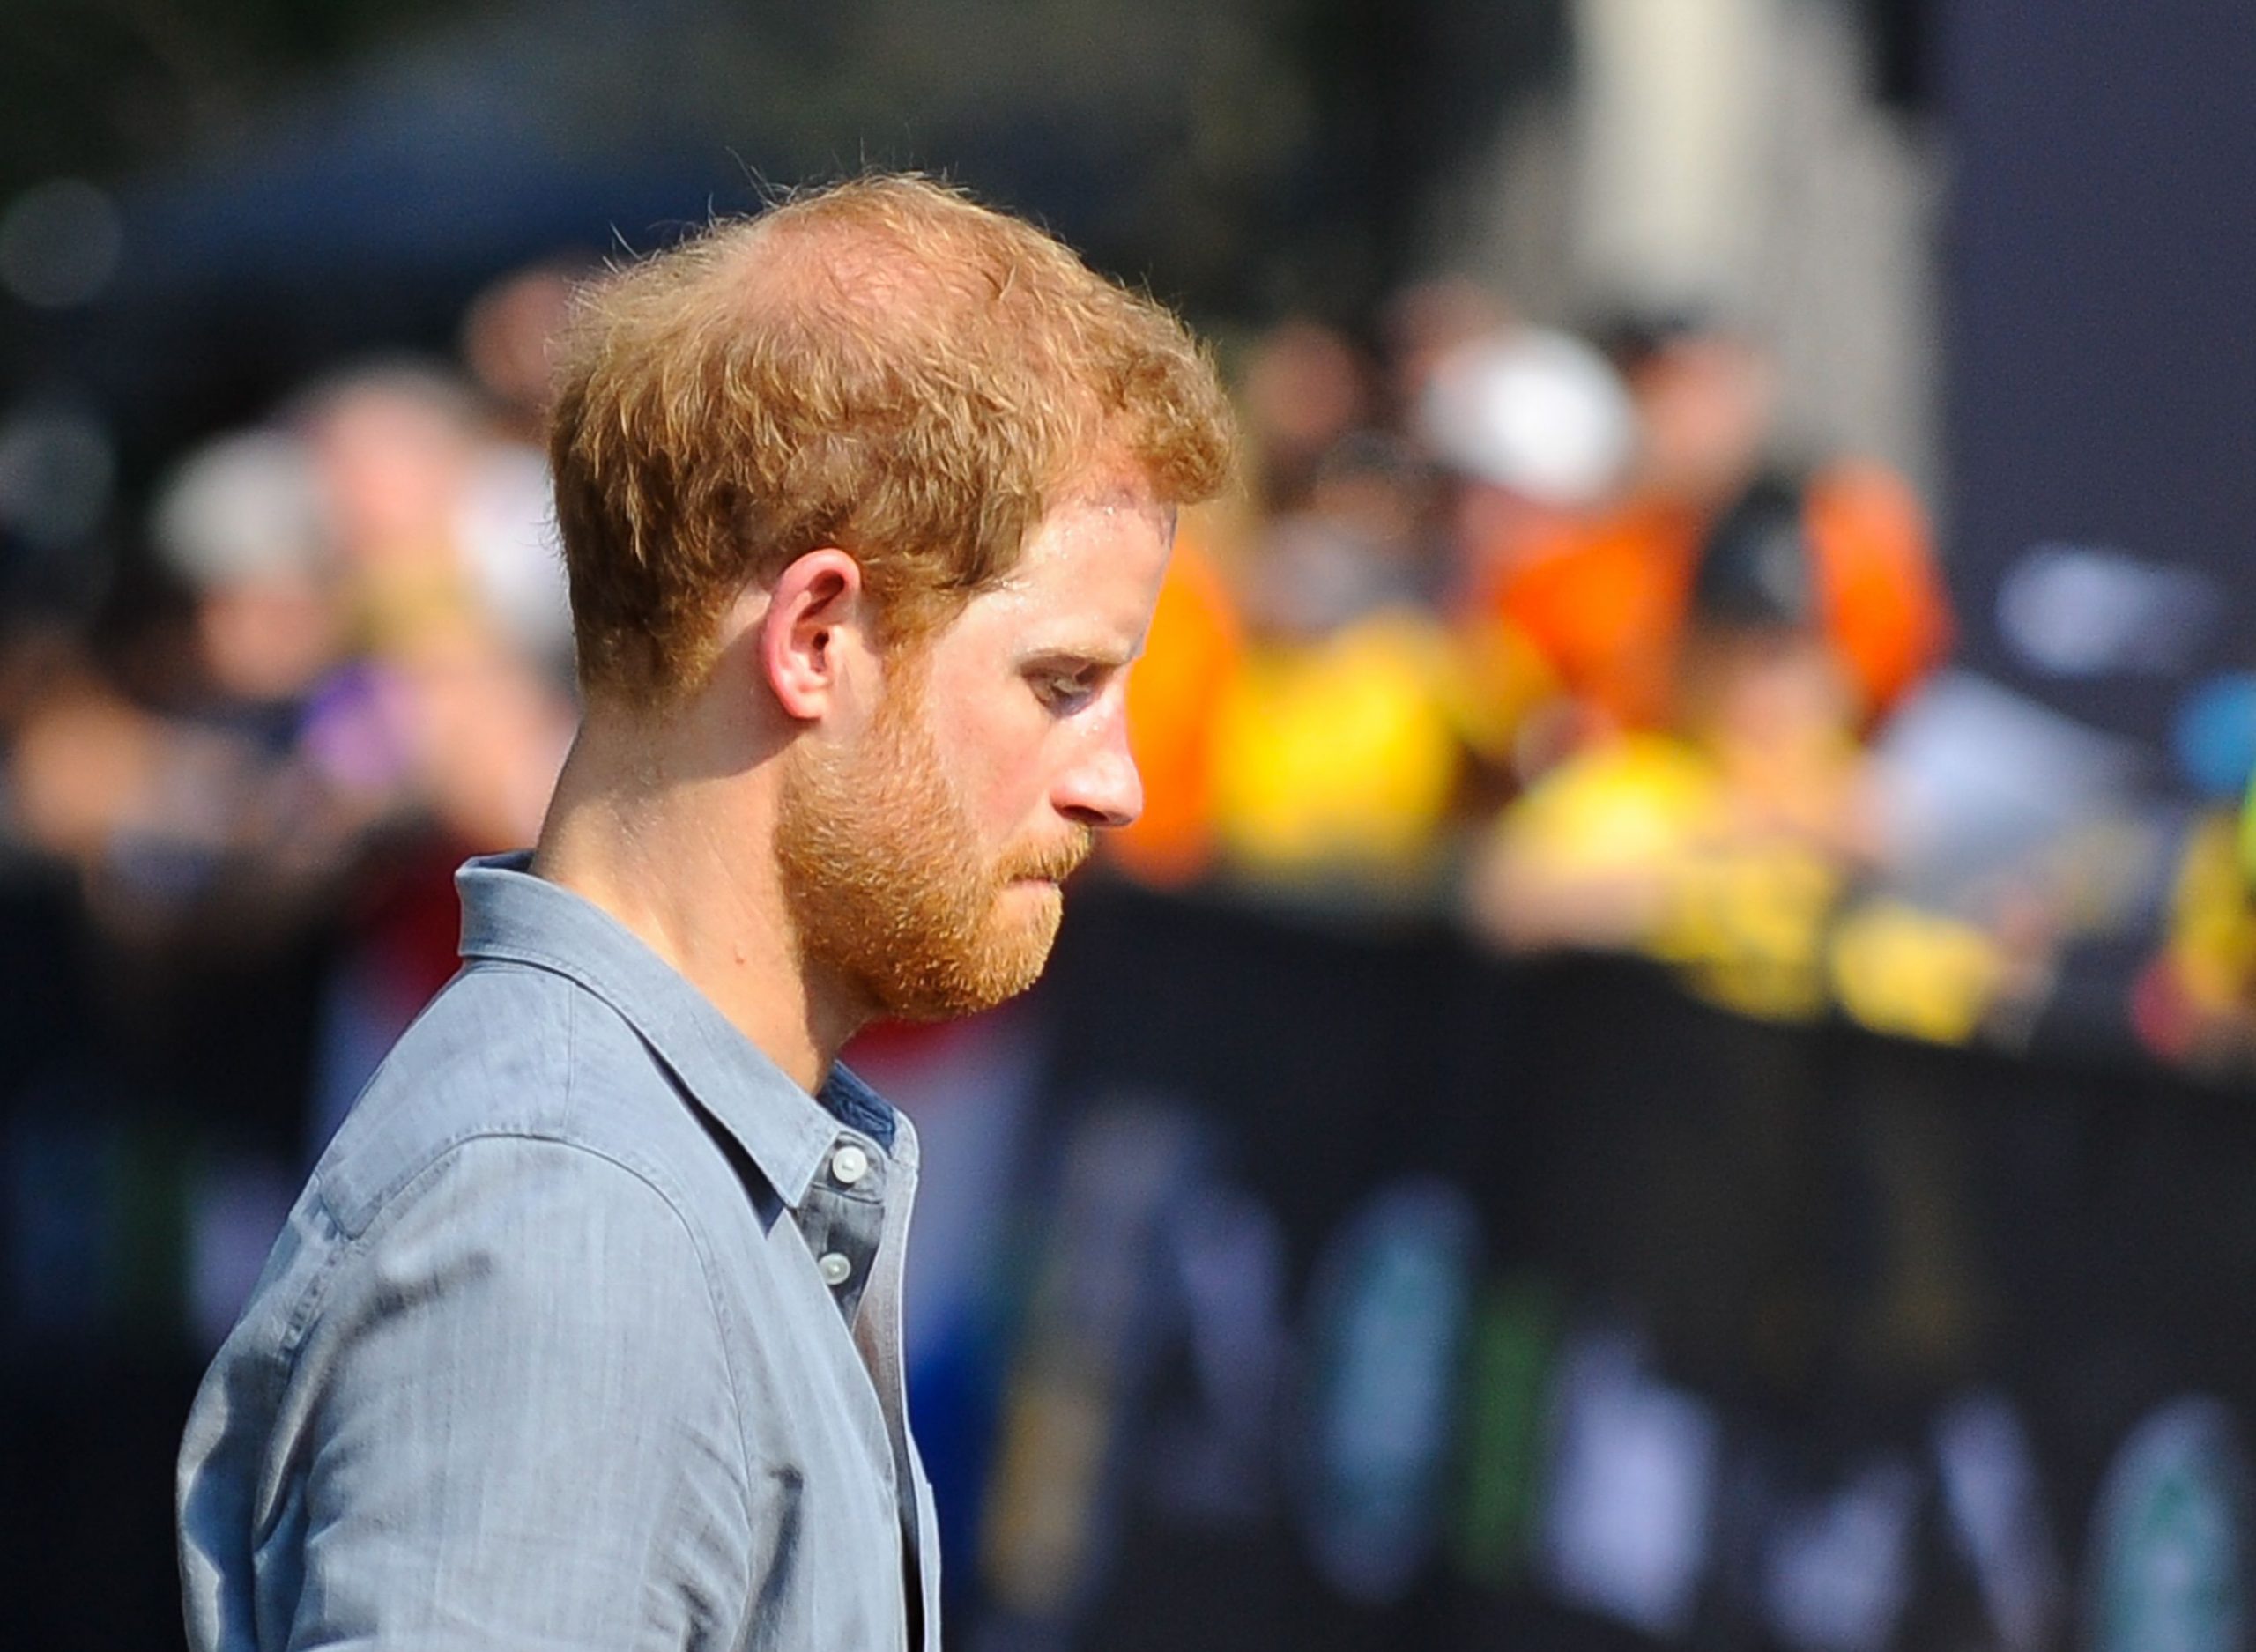 The Royal Family Is Being Pressured To Remove Prince Harry From The Line Of Succession